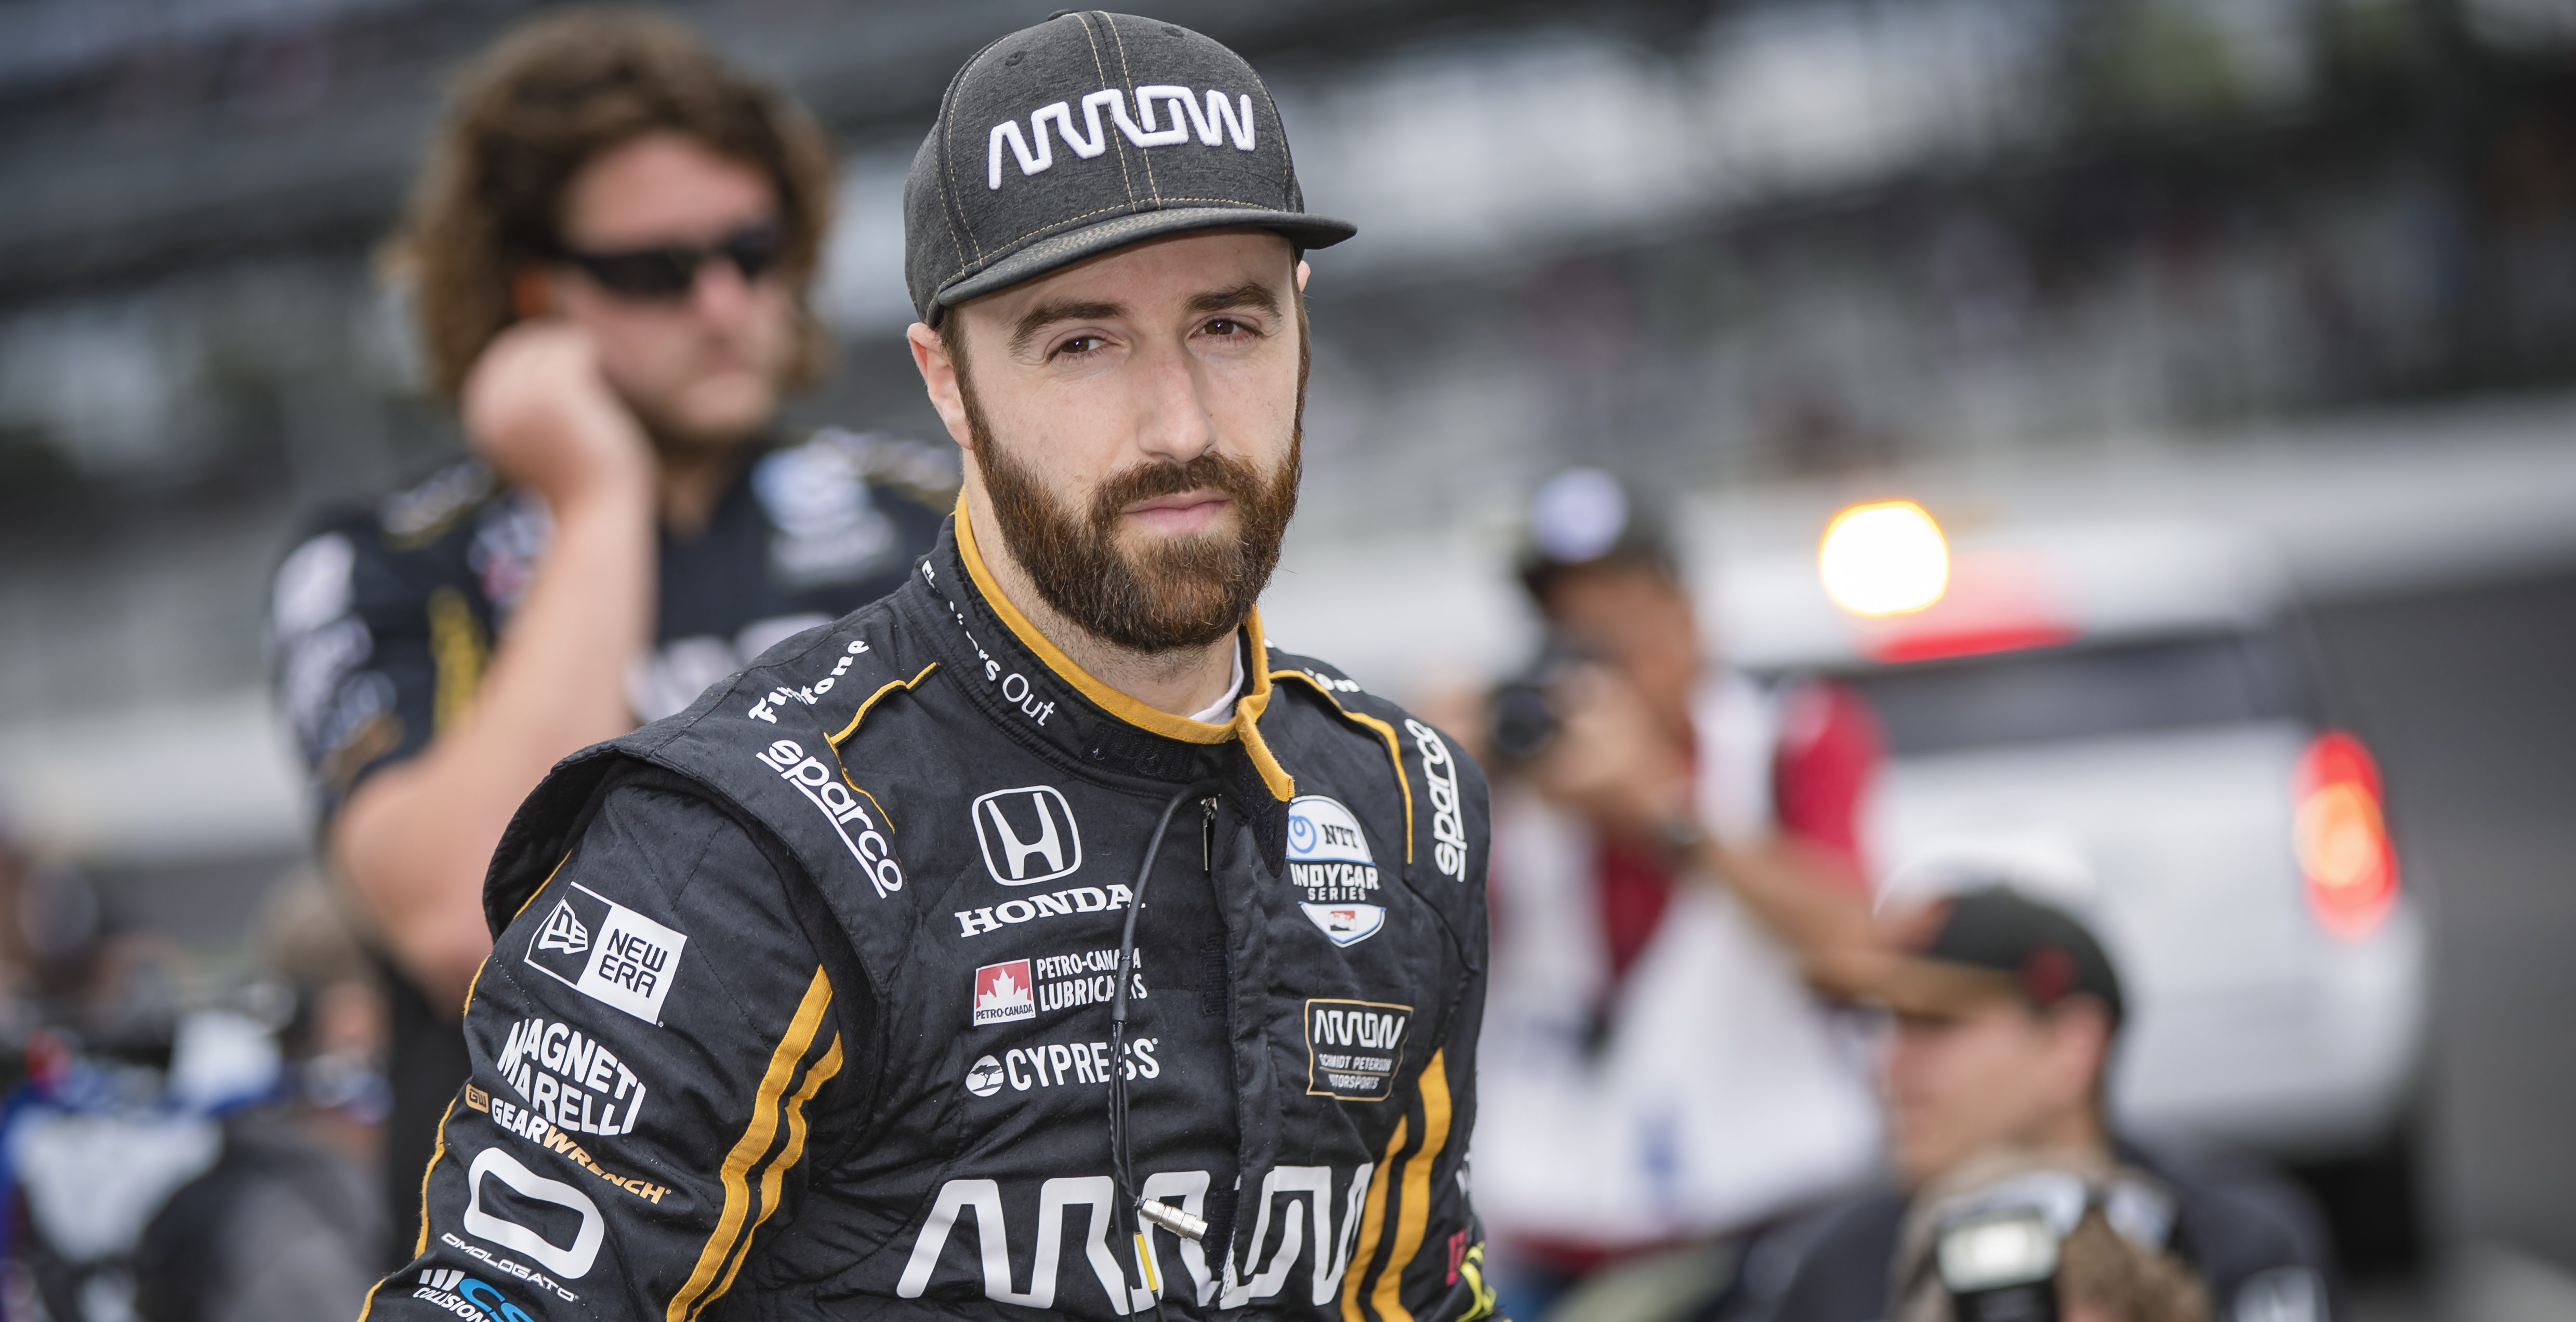 INDIANAPOLIS, IN - MAY 19: James Hinchcliffe #5 of Canada and Arrow Schmidt Peterson Motorsports, is seen in the pit area before his final qualification run for the Indy 500 at Indianapolis Motor Speedway on May 19, 2019 in Indianapolis, Indiana.